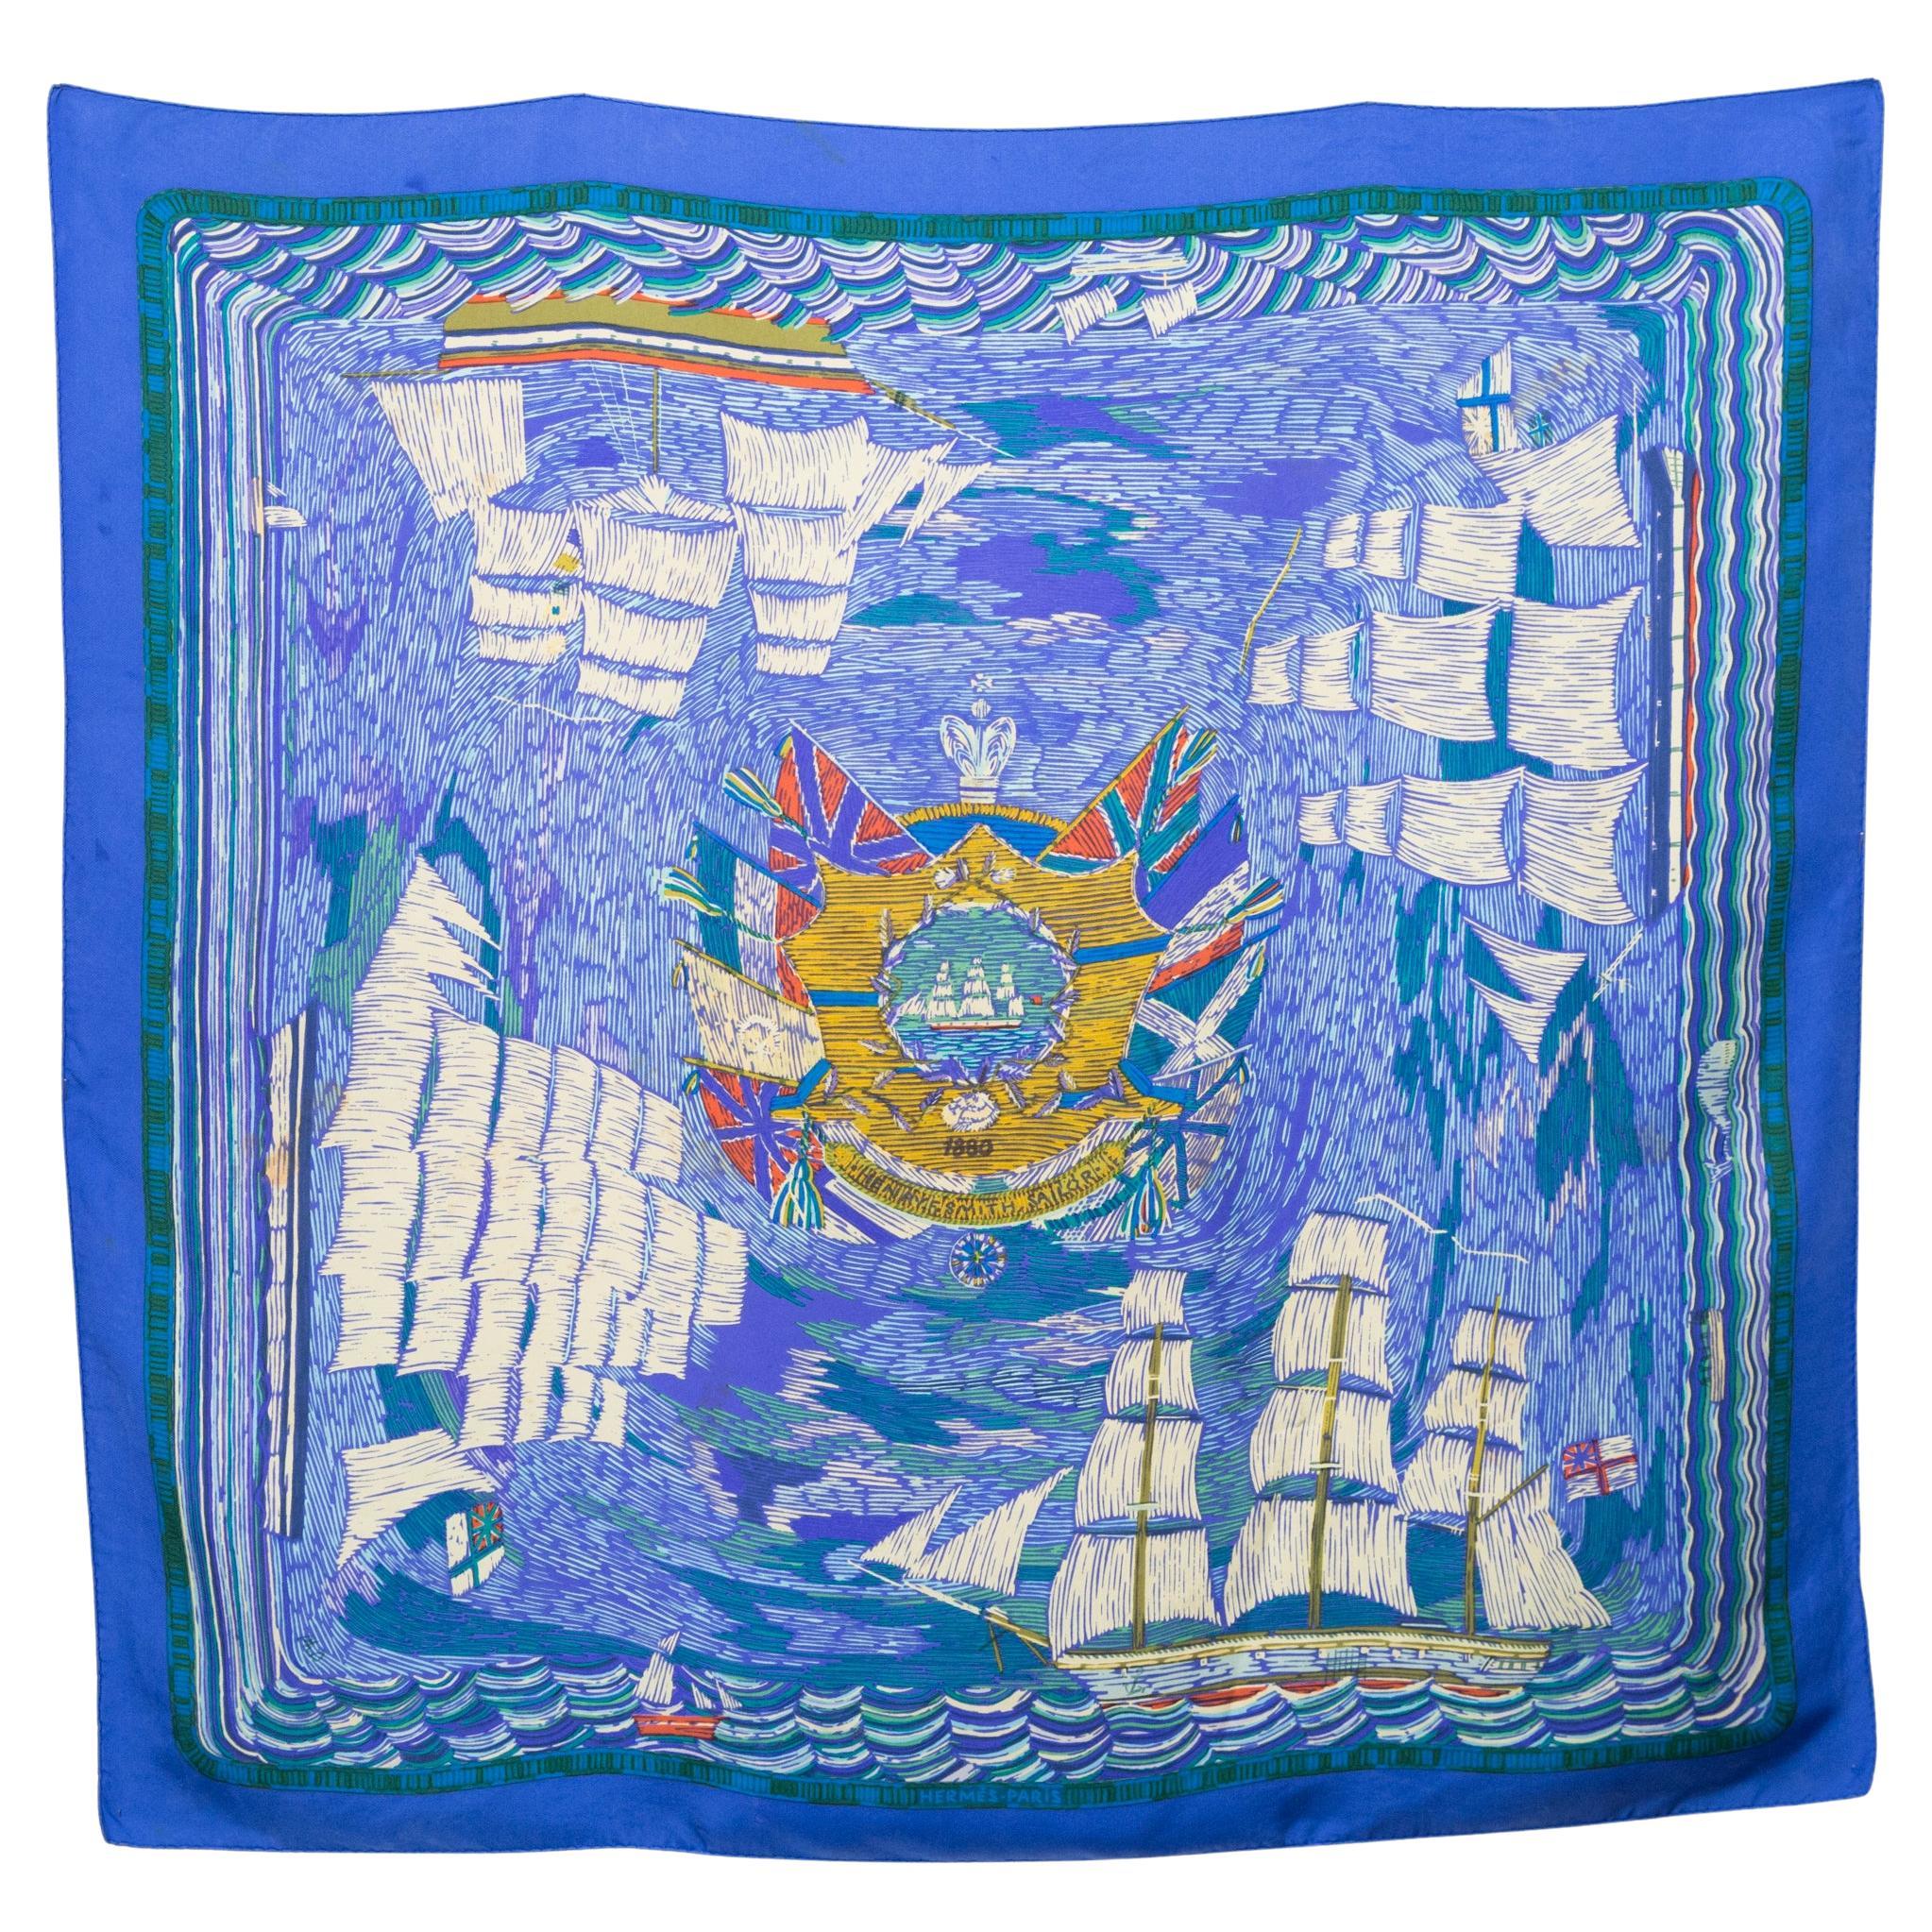 Hermes Marine Naive 1880 Henry-F Smith Sailor by P Dumas Silk Scarf For Sale